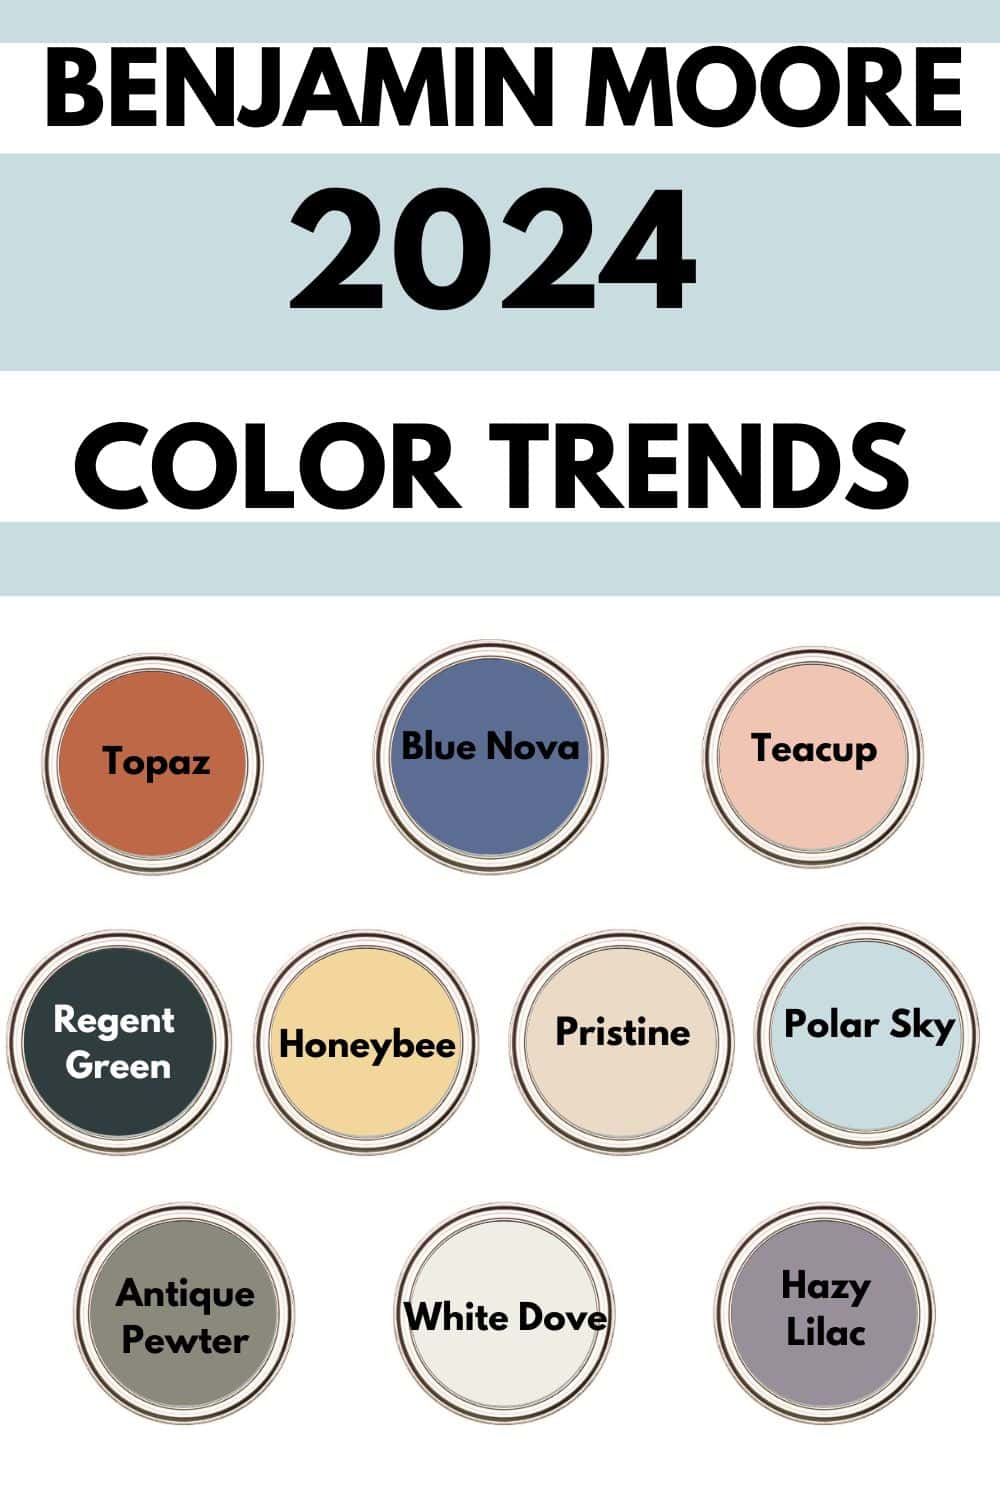 Benjamin Moore 2024 Color Trends & Color of the Year Blue Nova West